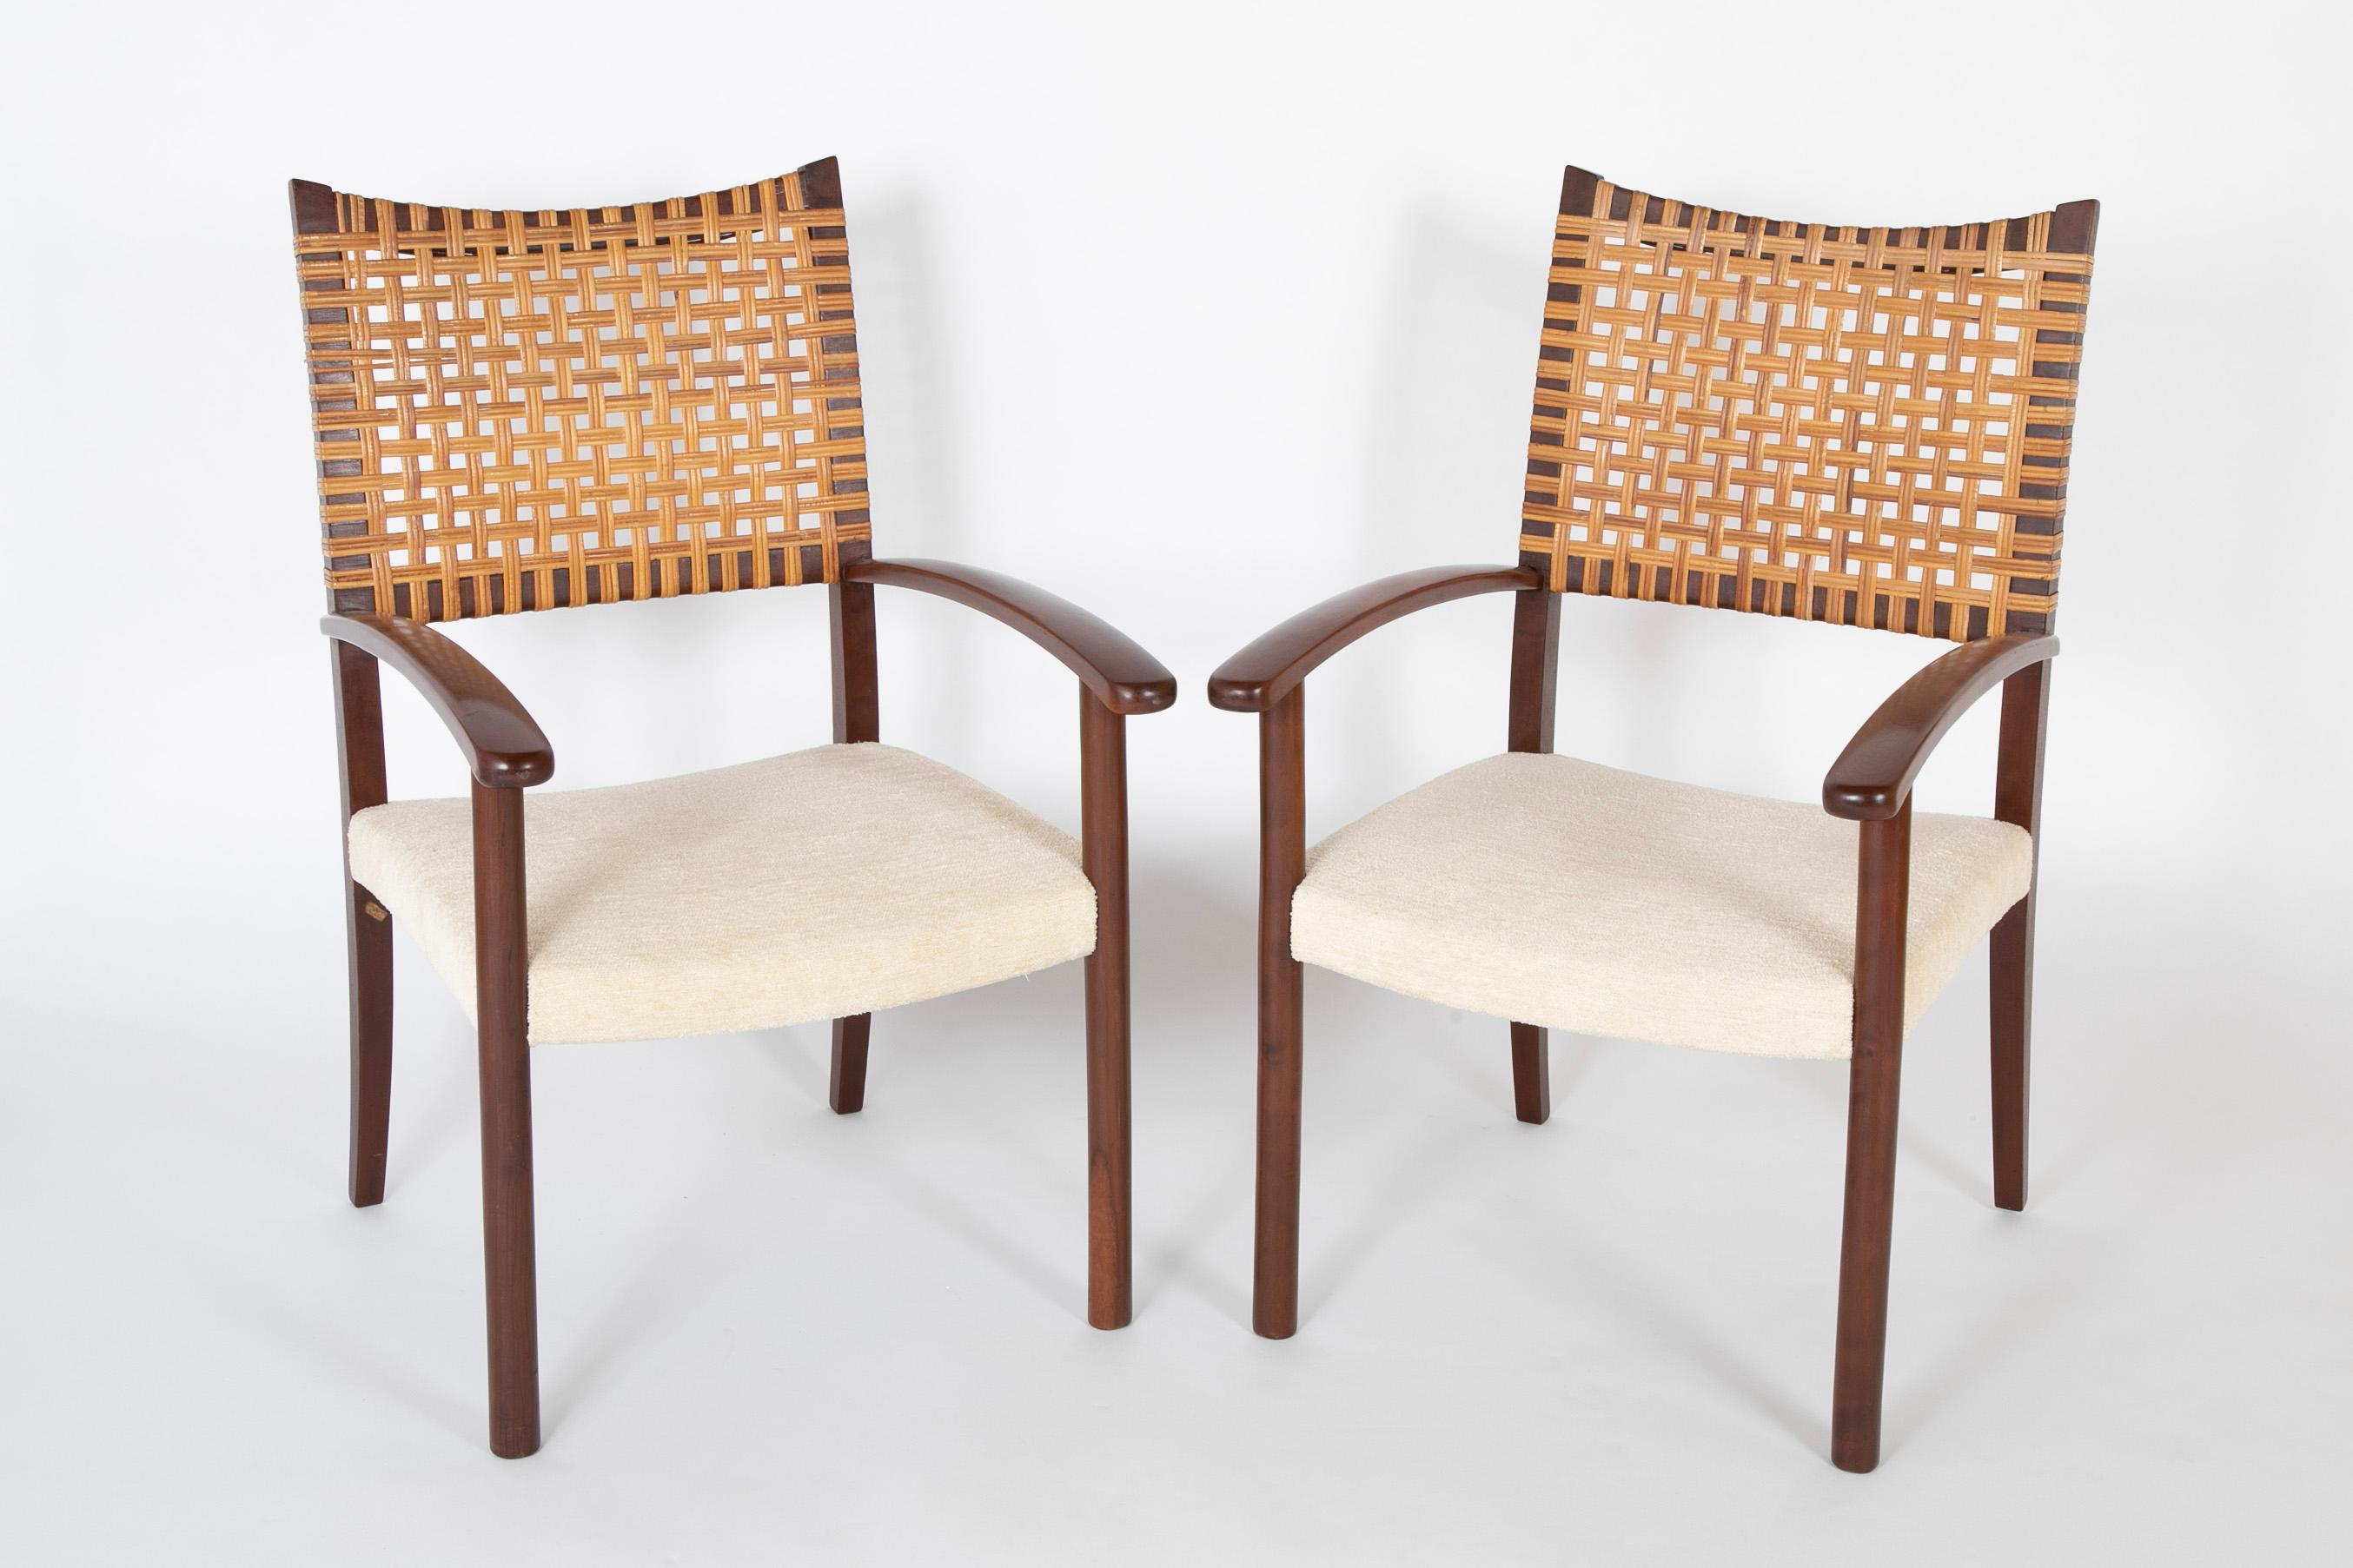 A striking pair of caned back open armchairs.  Designed in Brazil by Adolfo Foltas